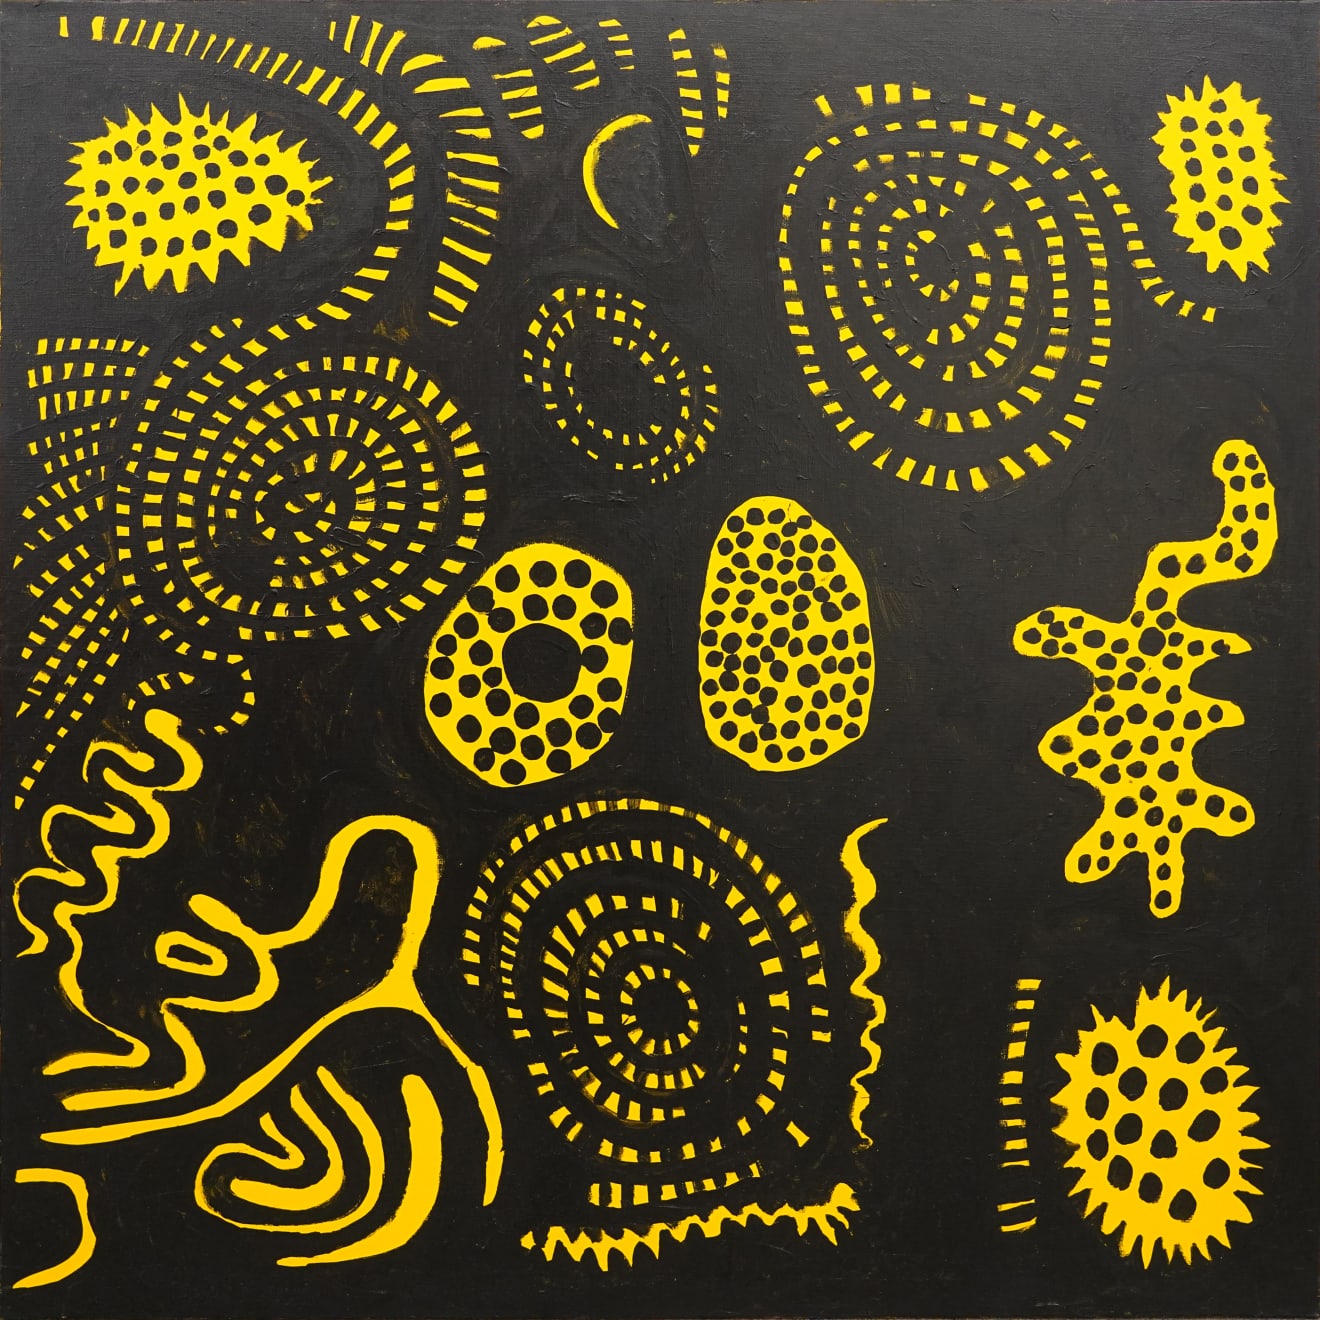 Yayoi Kusama, DISTANT ARE THE STARS THAT SHINE ON THE PURSUIT OF 